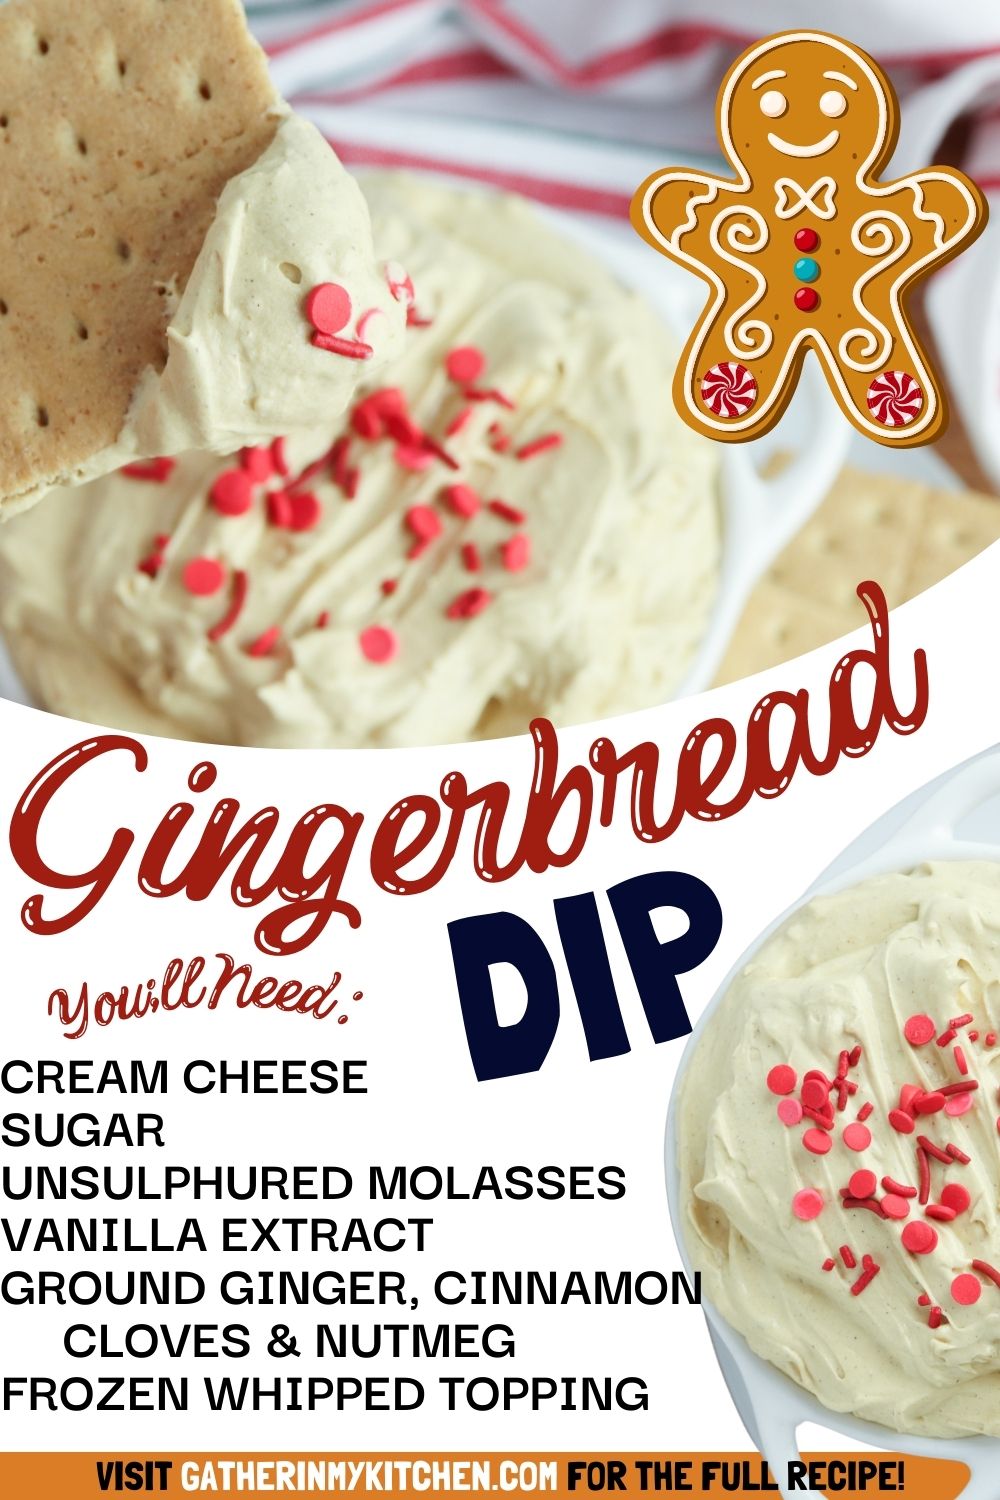 Top has a closeup of gingerbread dip on a graham cracker, bottom left has ingredients for Gingerbread dip and bottom right has the dip in a bowl.